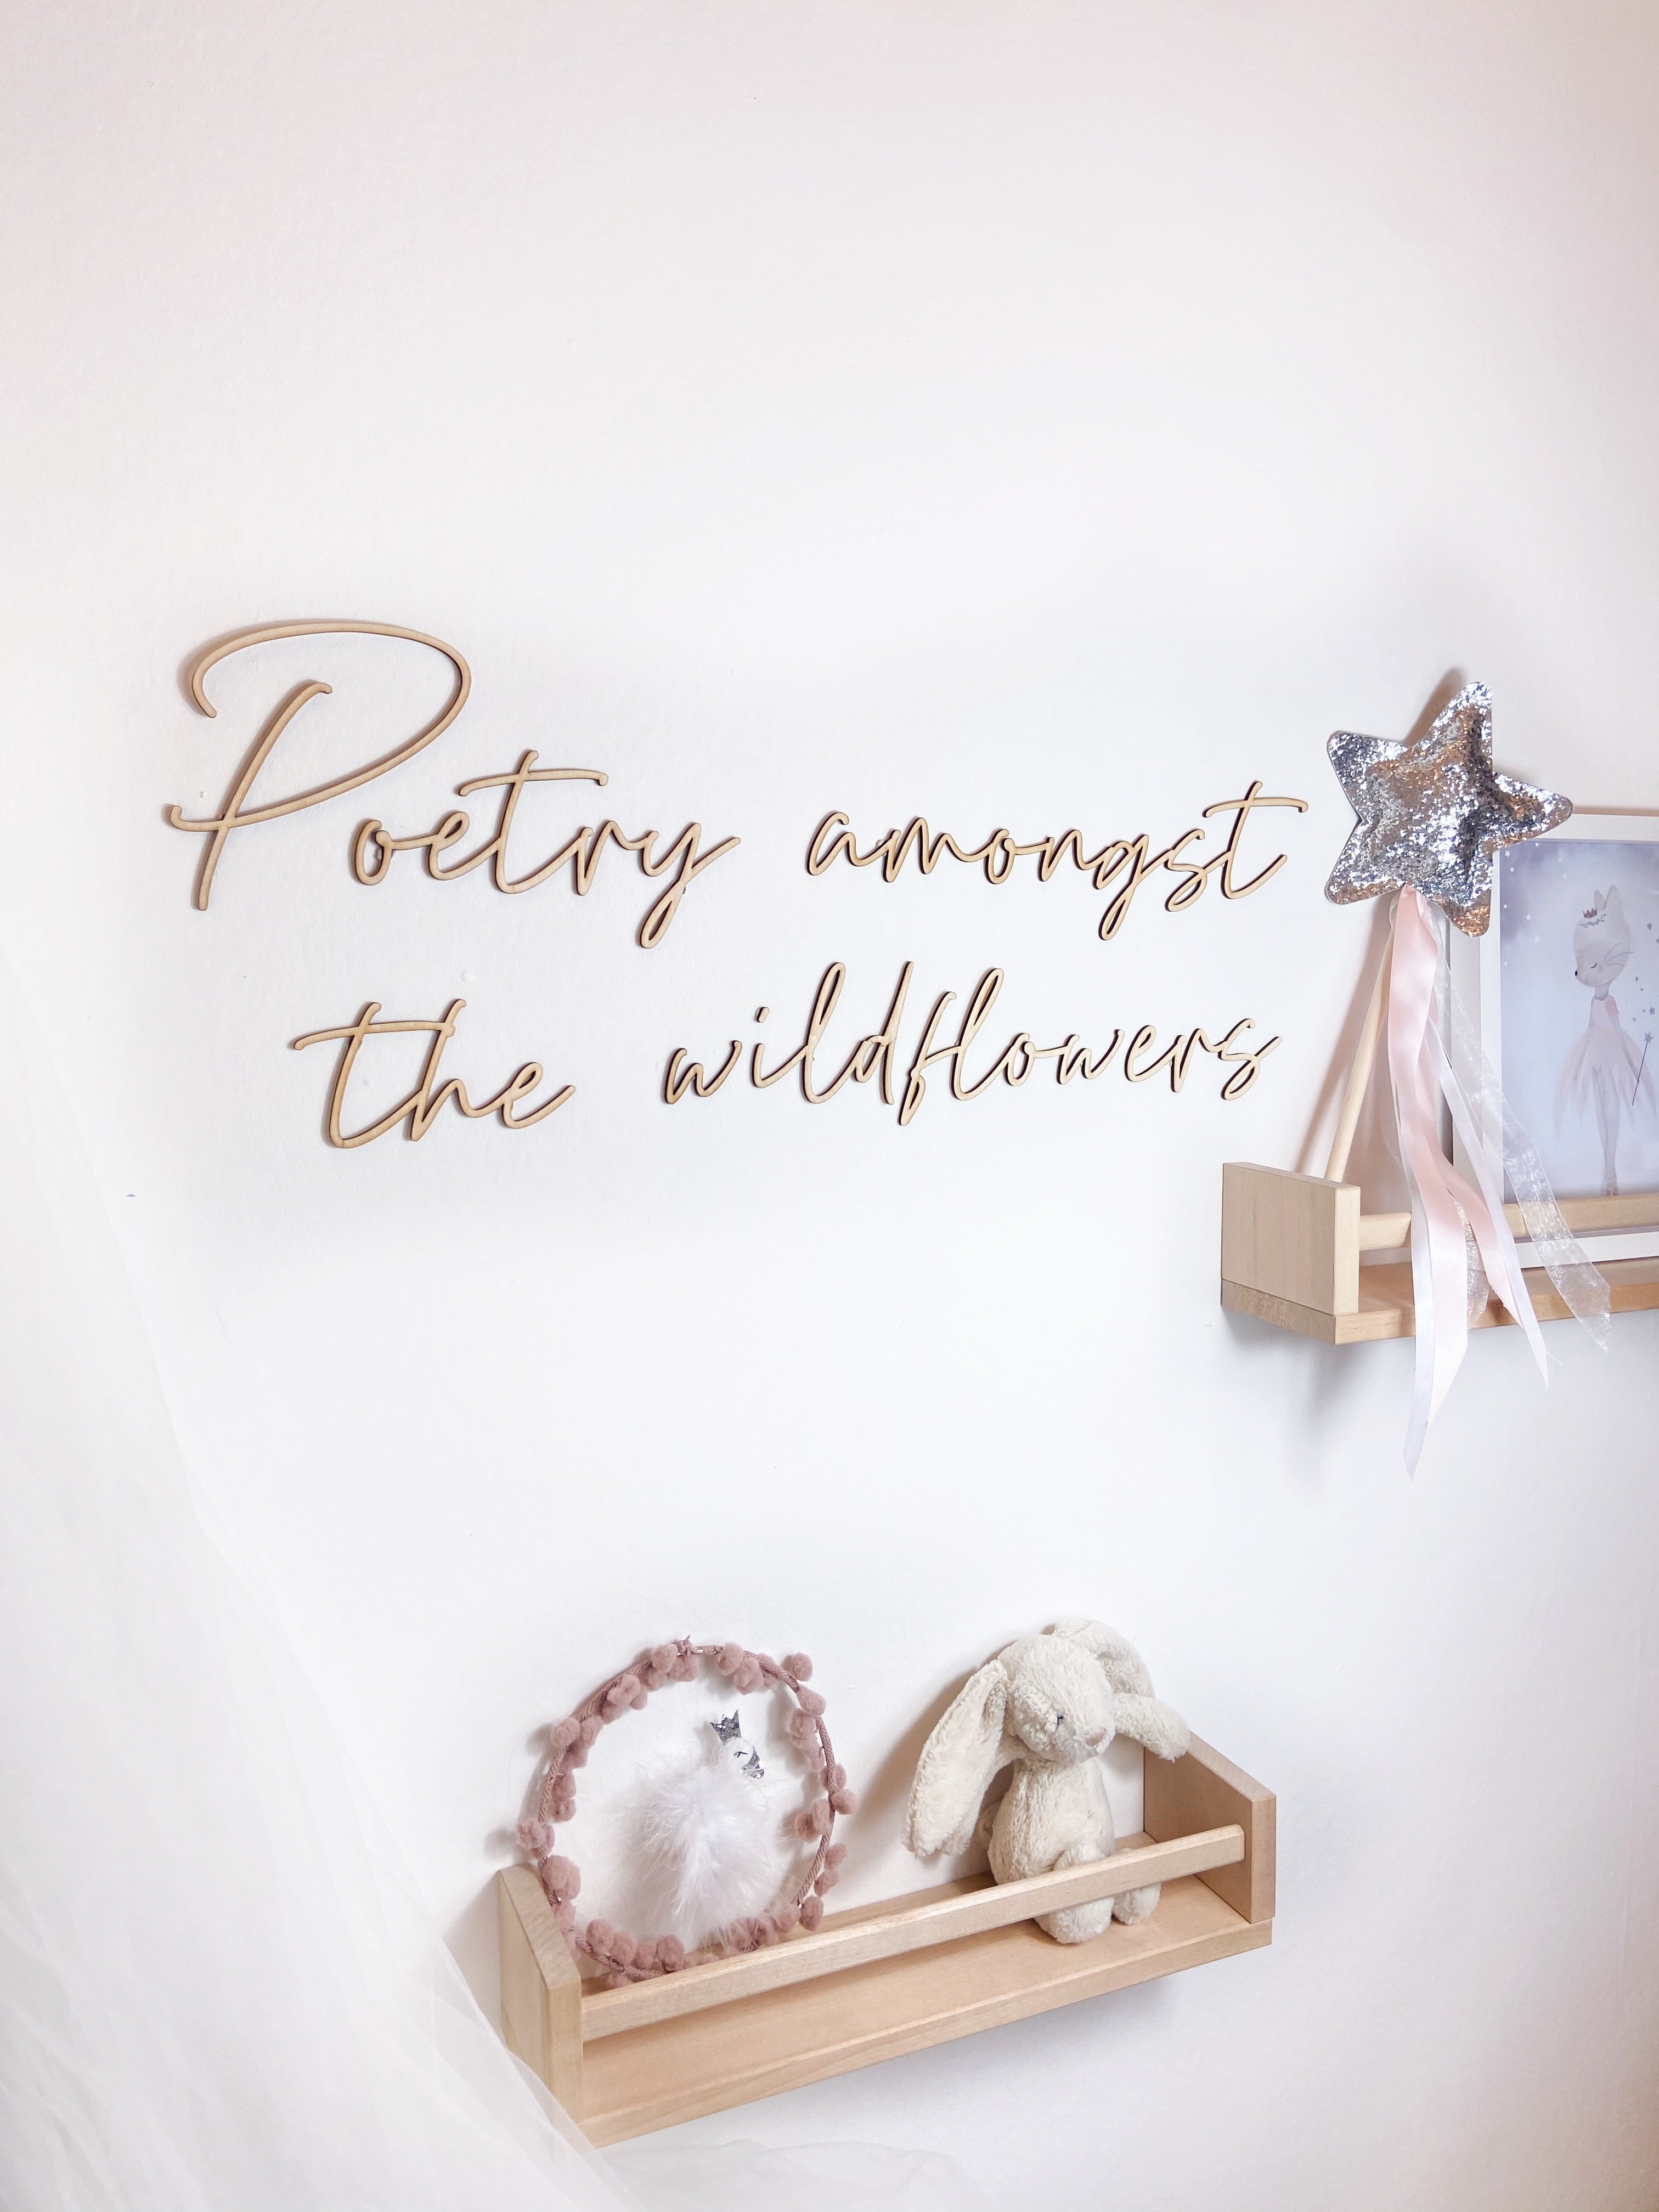 "Poetry amongst the wildflowers" Wooden Wall Quote